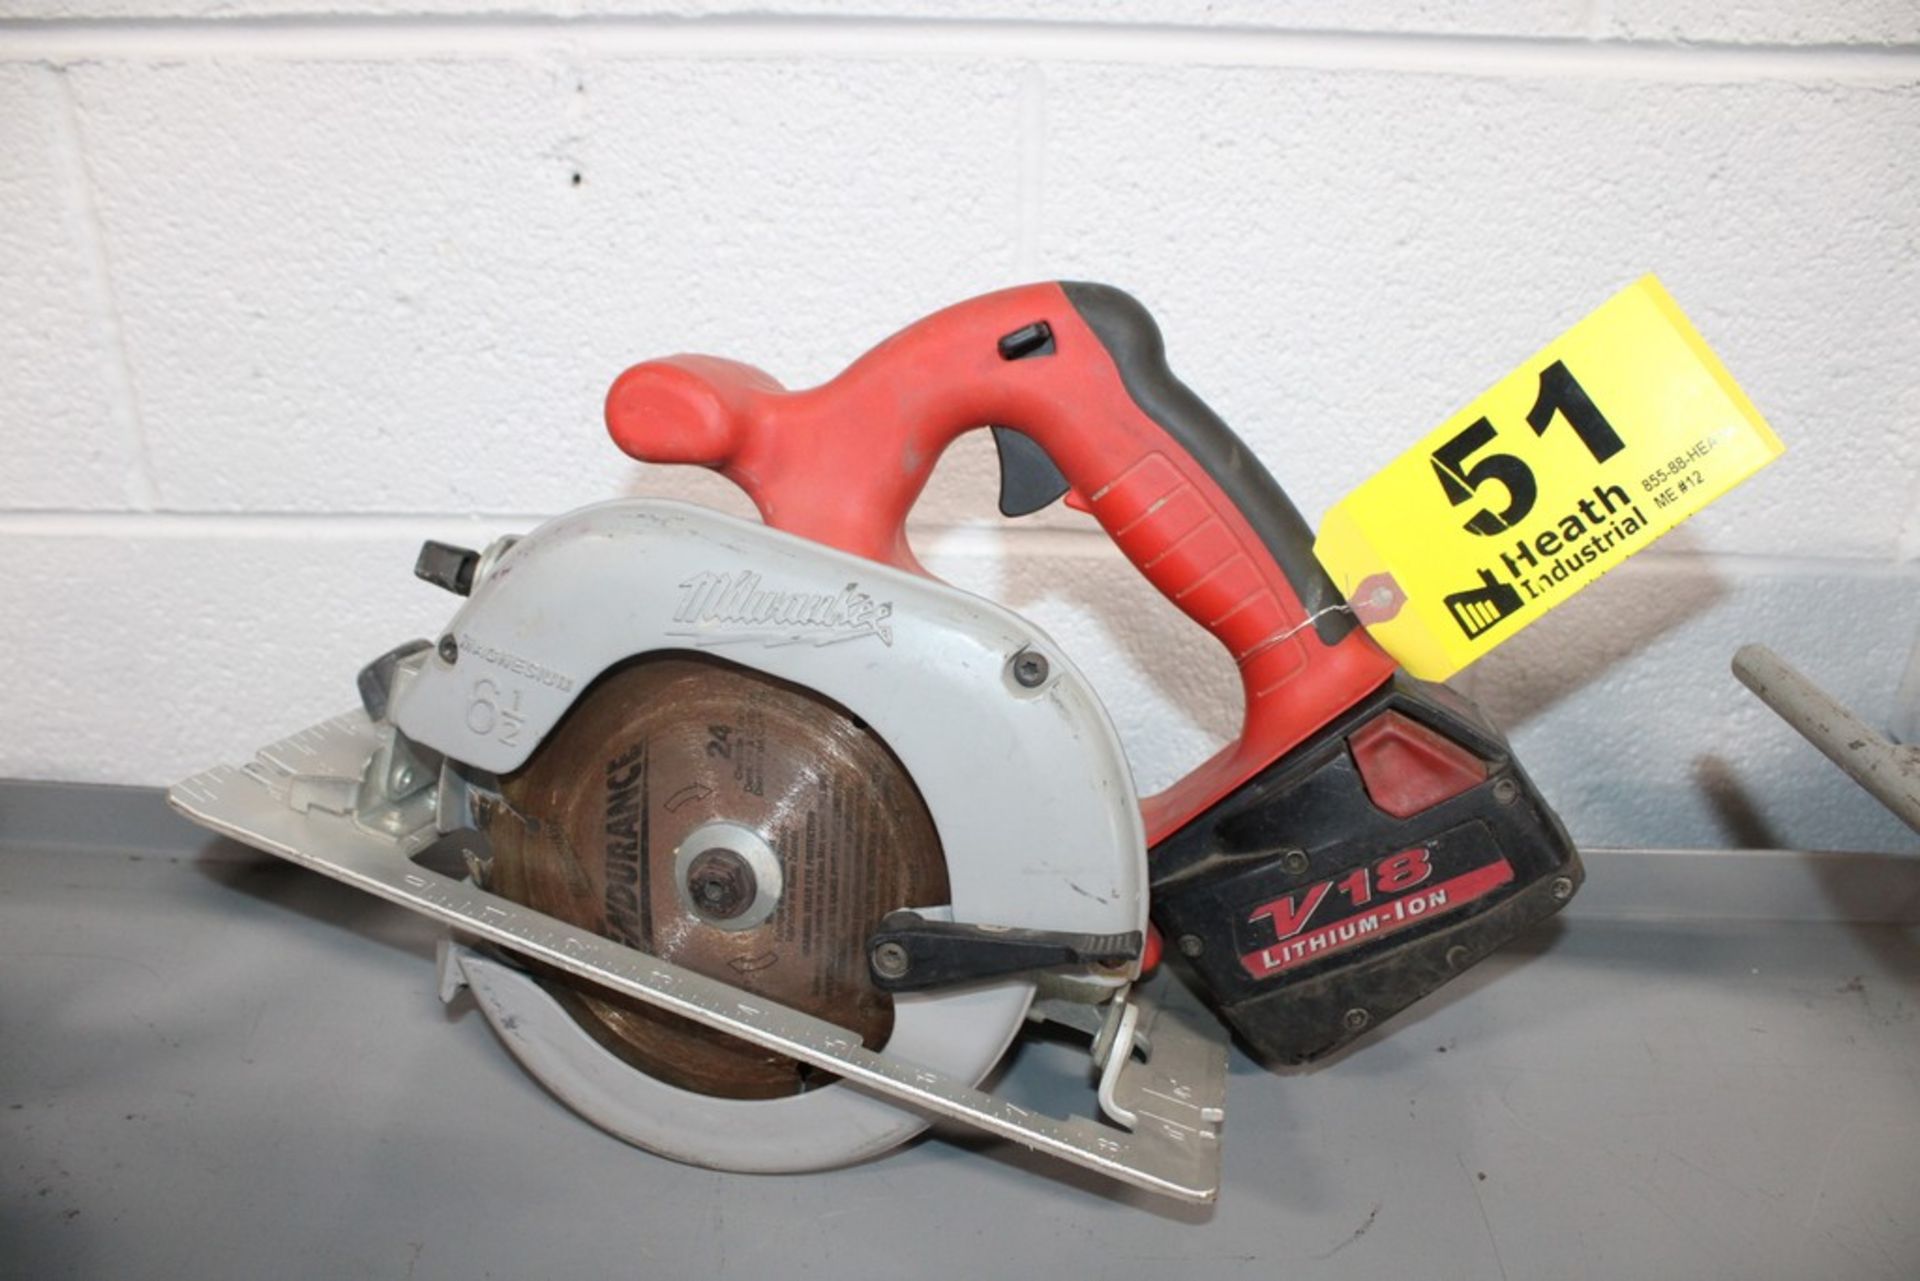 MILWAUKEE MODEL 6310-20 18 V CIRCULAR SAW WITH BATTERY, NO CHARGER